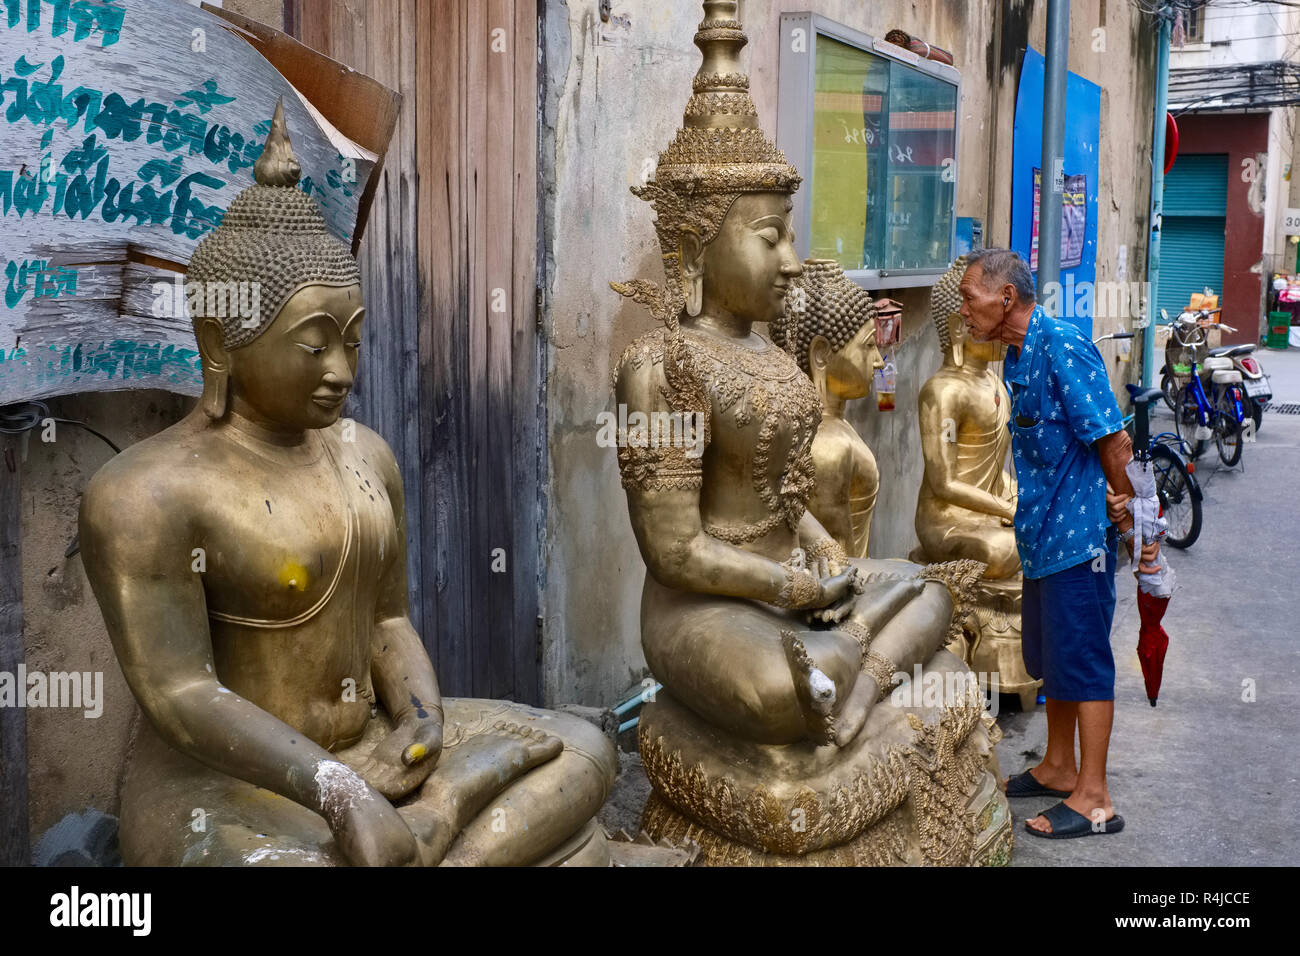 Outside a factory for Buddha statues in Bamrung Muang Road in Bangkok, Thailand, a man looks inensely at a statue placed outside for delivery Stock Photo